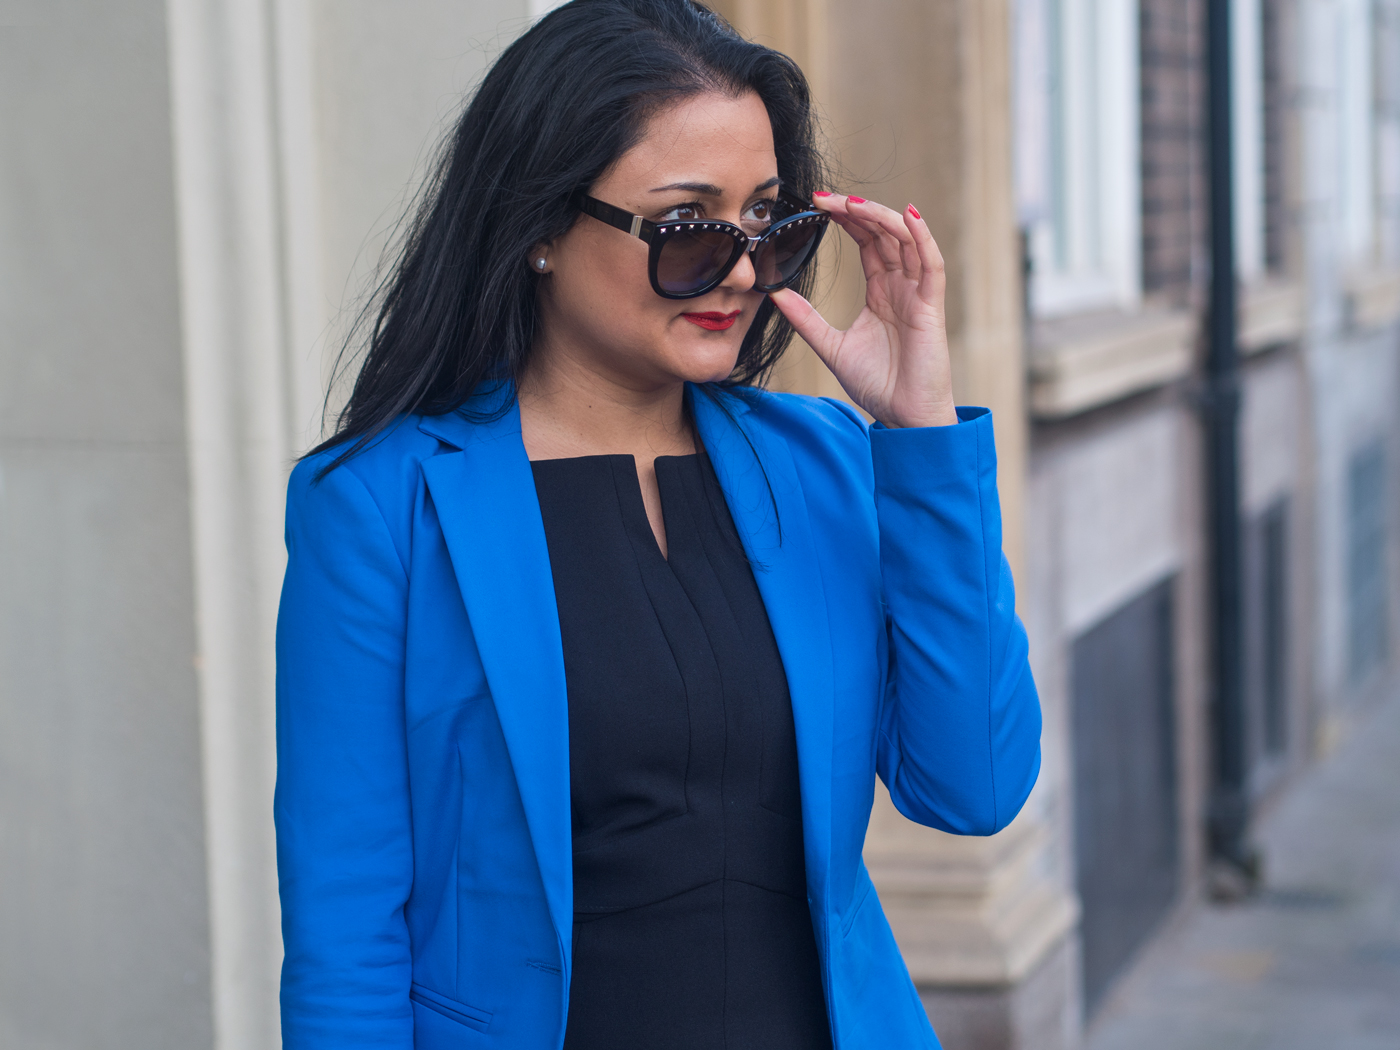 How to style a statement jacket